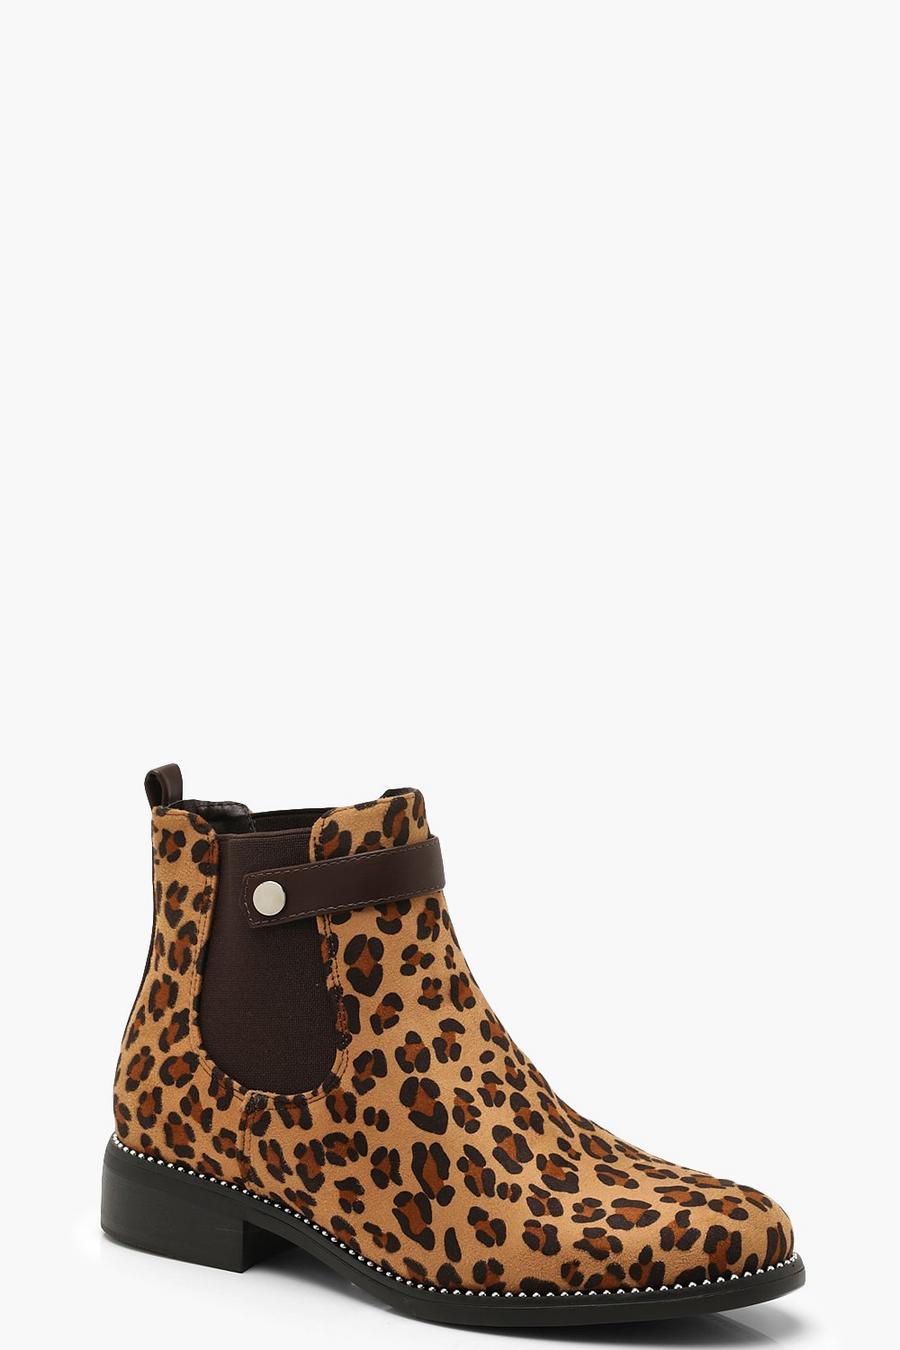 Chelsea-Stiefel mit Leopardenmuster, Leopard image number 1